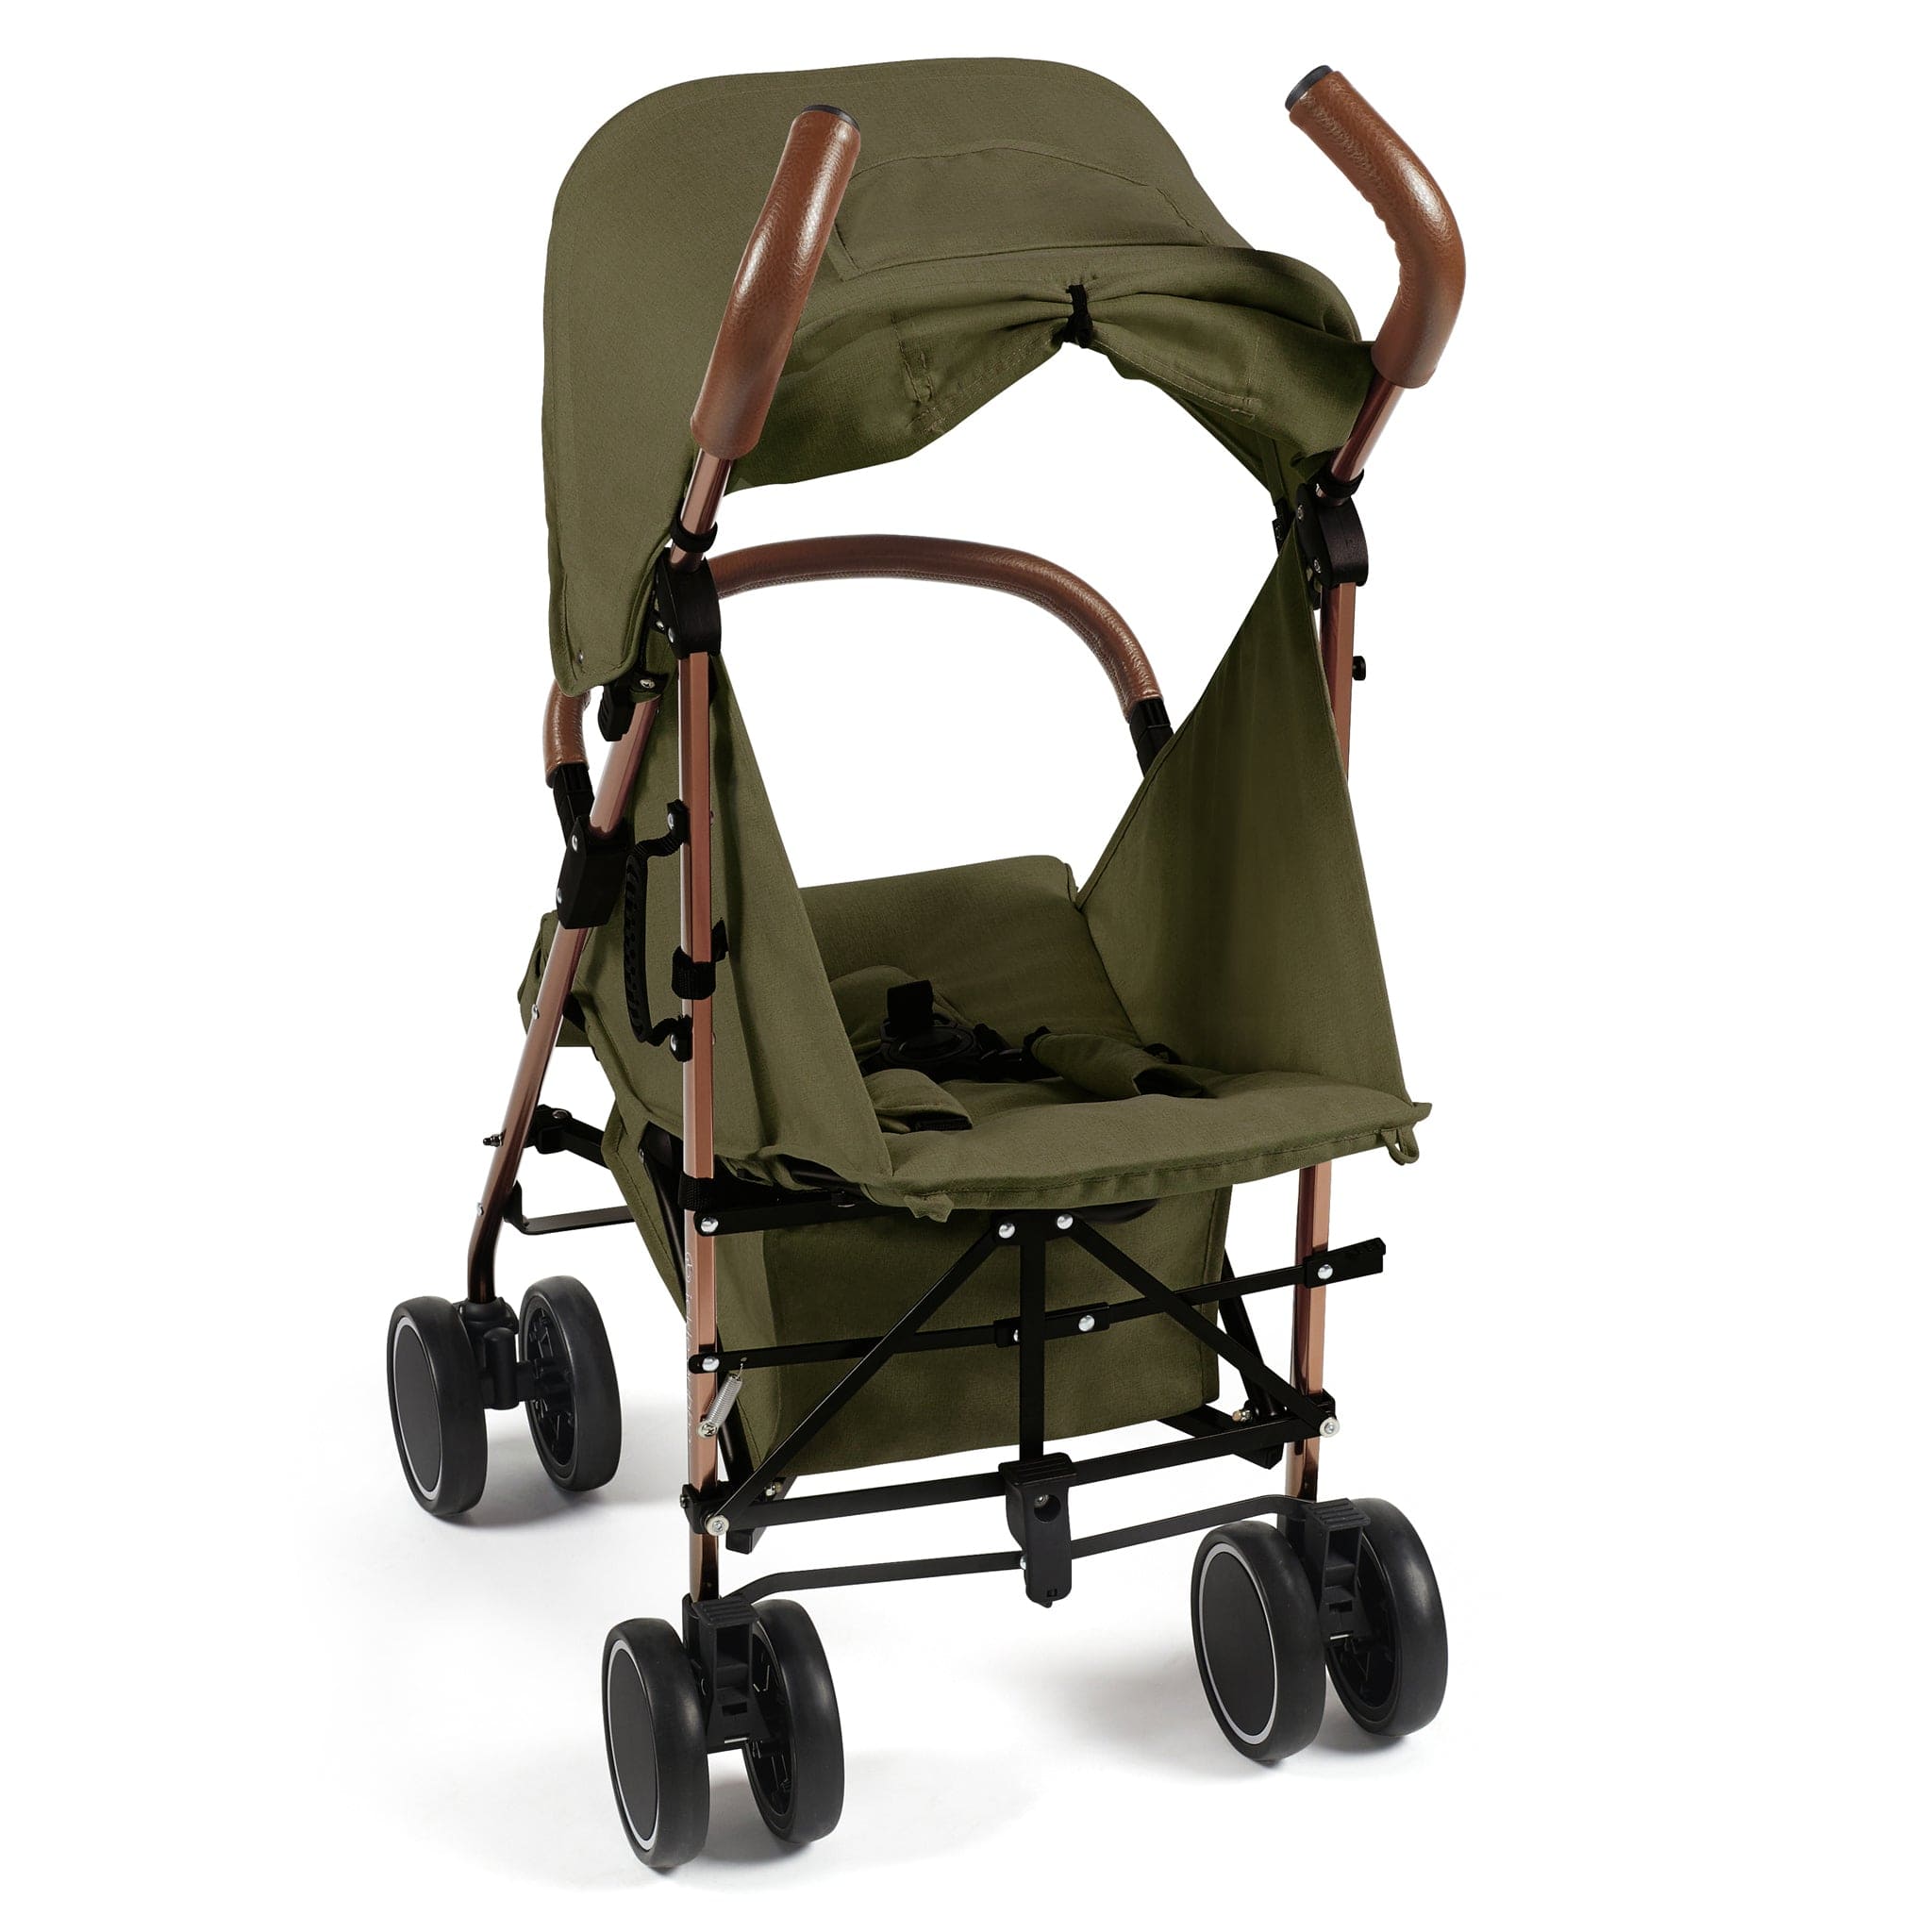 Ickle Bubba baby pushchairs Ickle Bubba Discovery Max Pushchair Rose Gold/Khaki 15-002-200-045